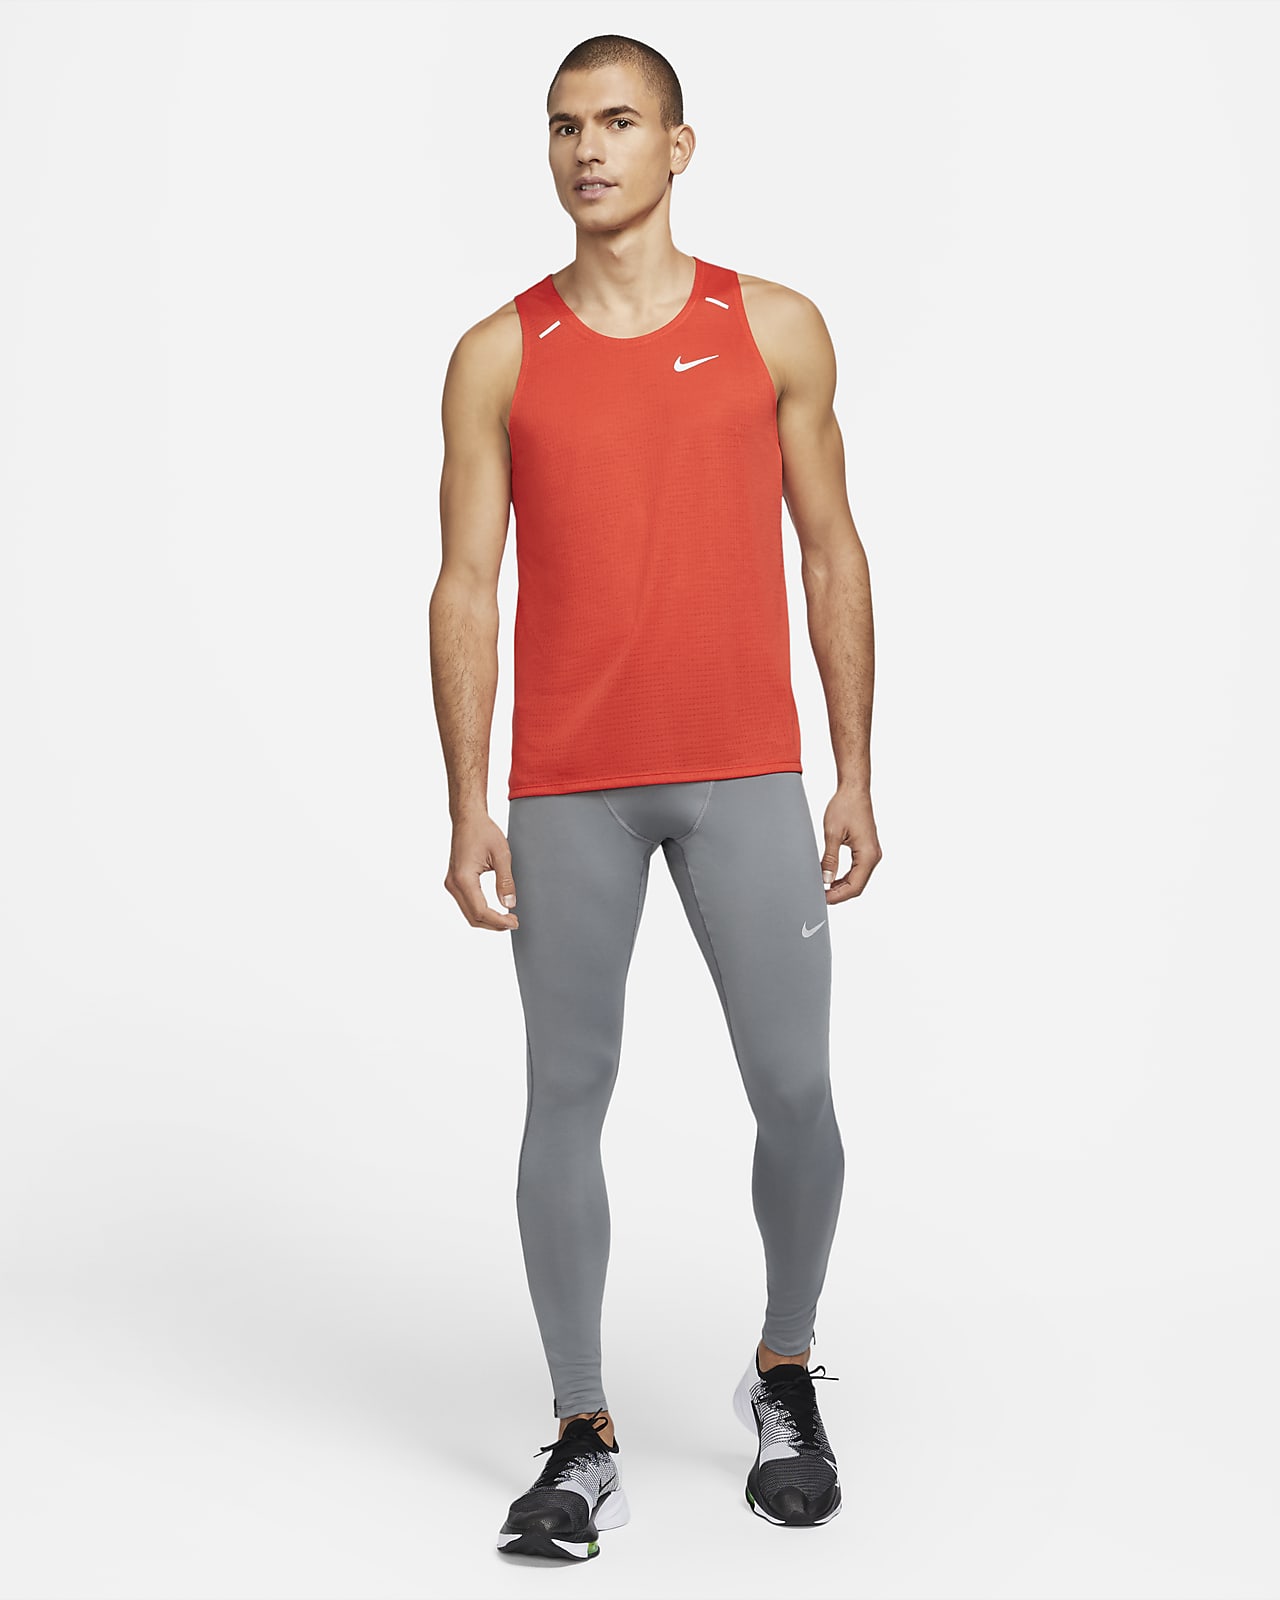 Buy Nike Challenger Dri-fit Tights M - Black At 30% Off